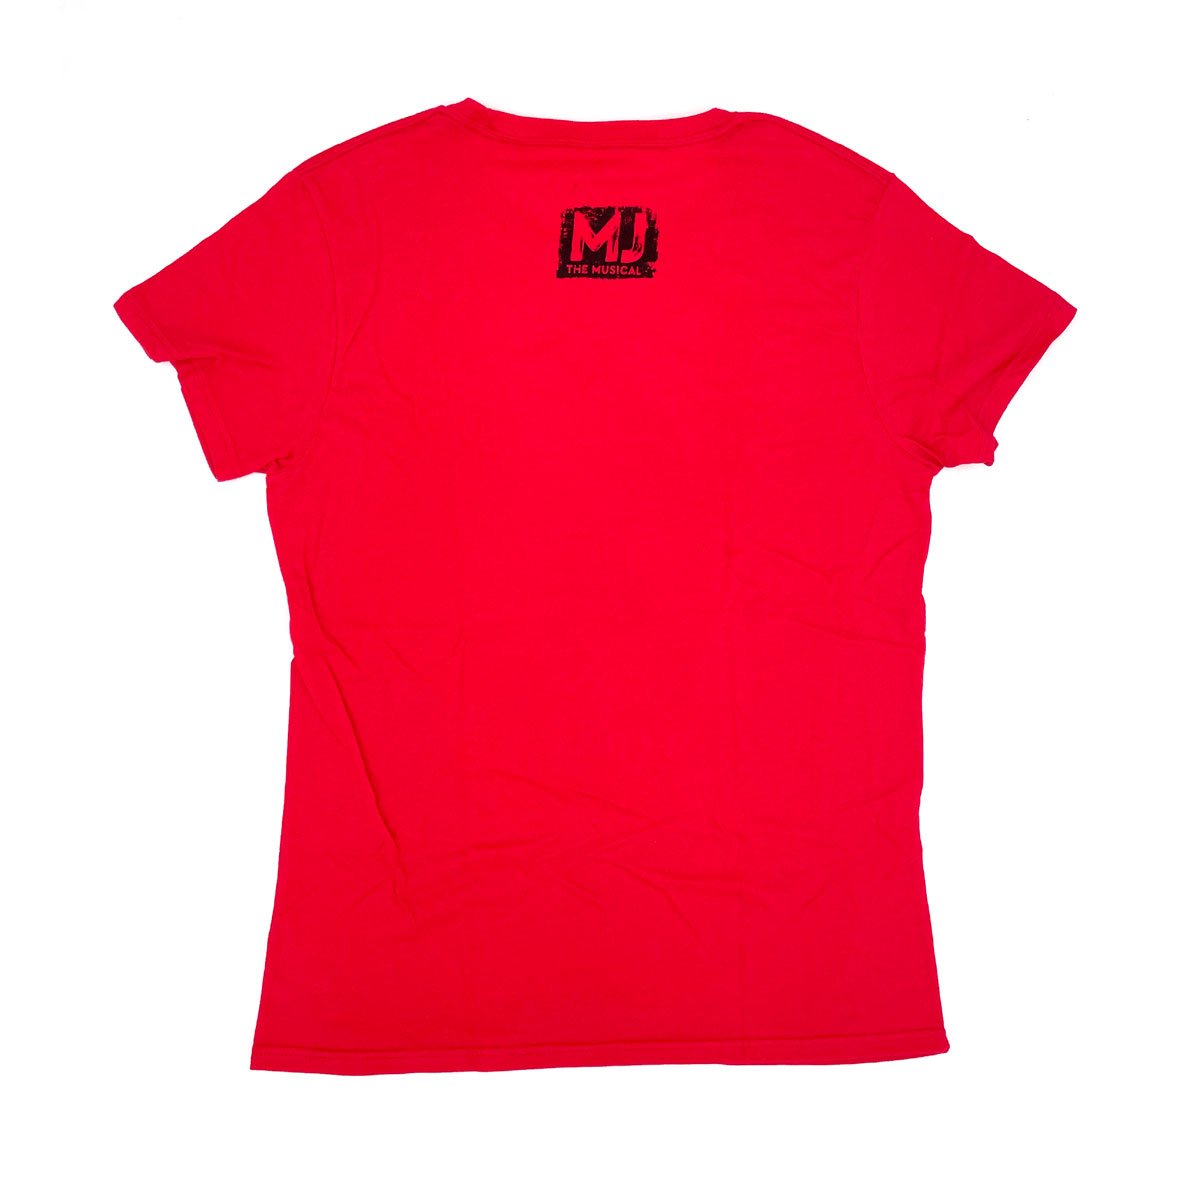 MJ THE MUSICAL Fitted Logo Tee - Red